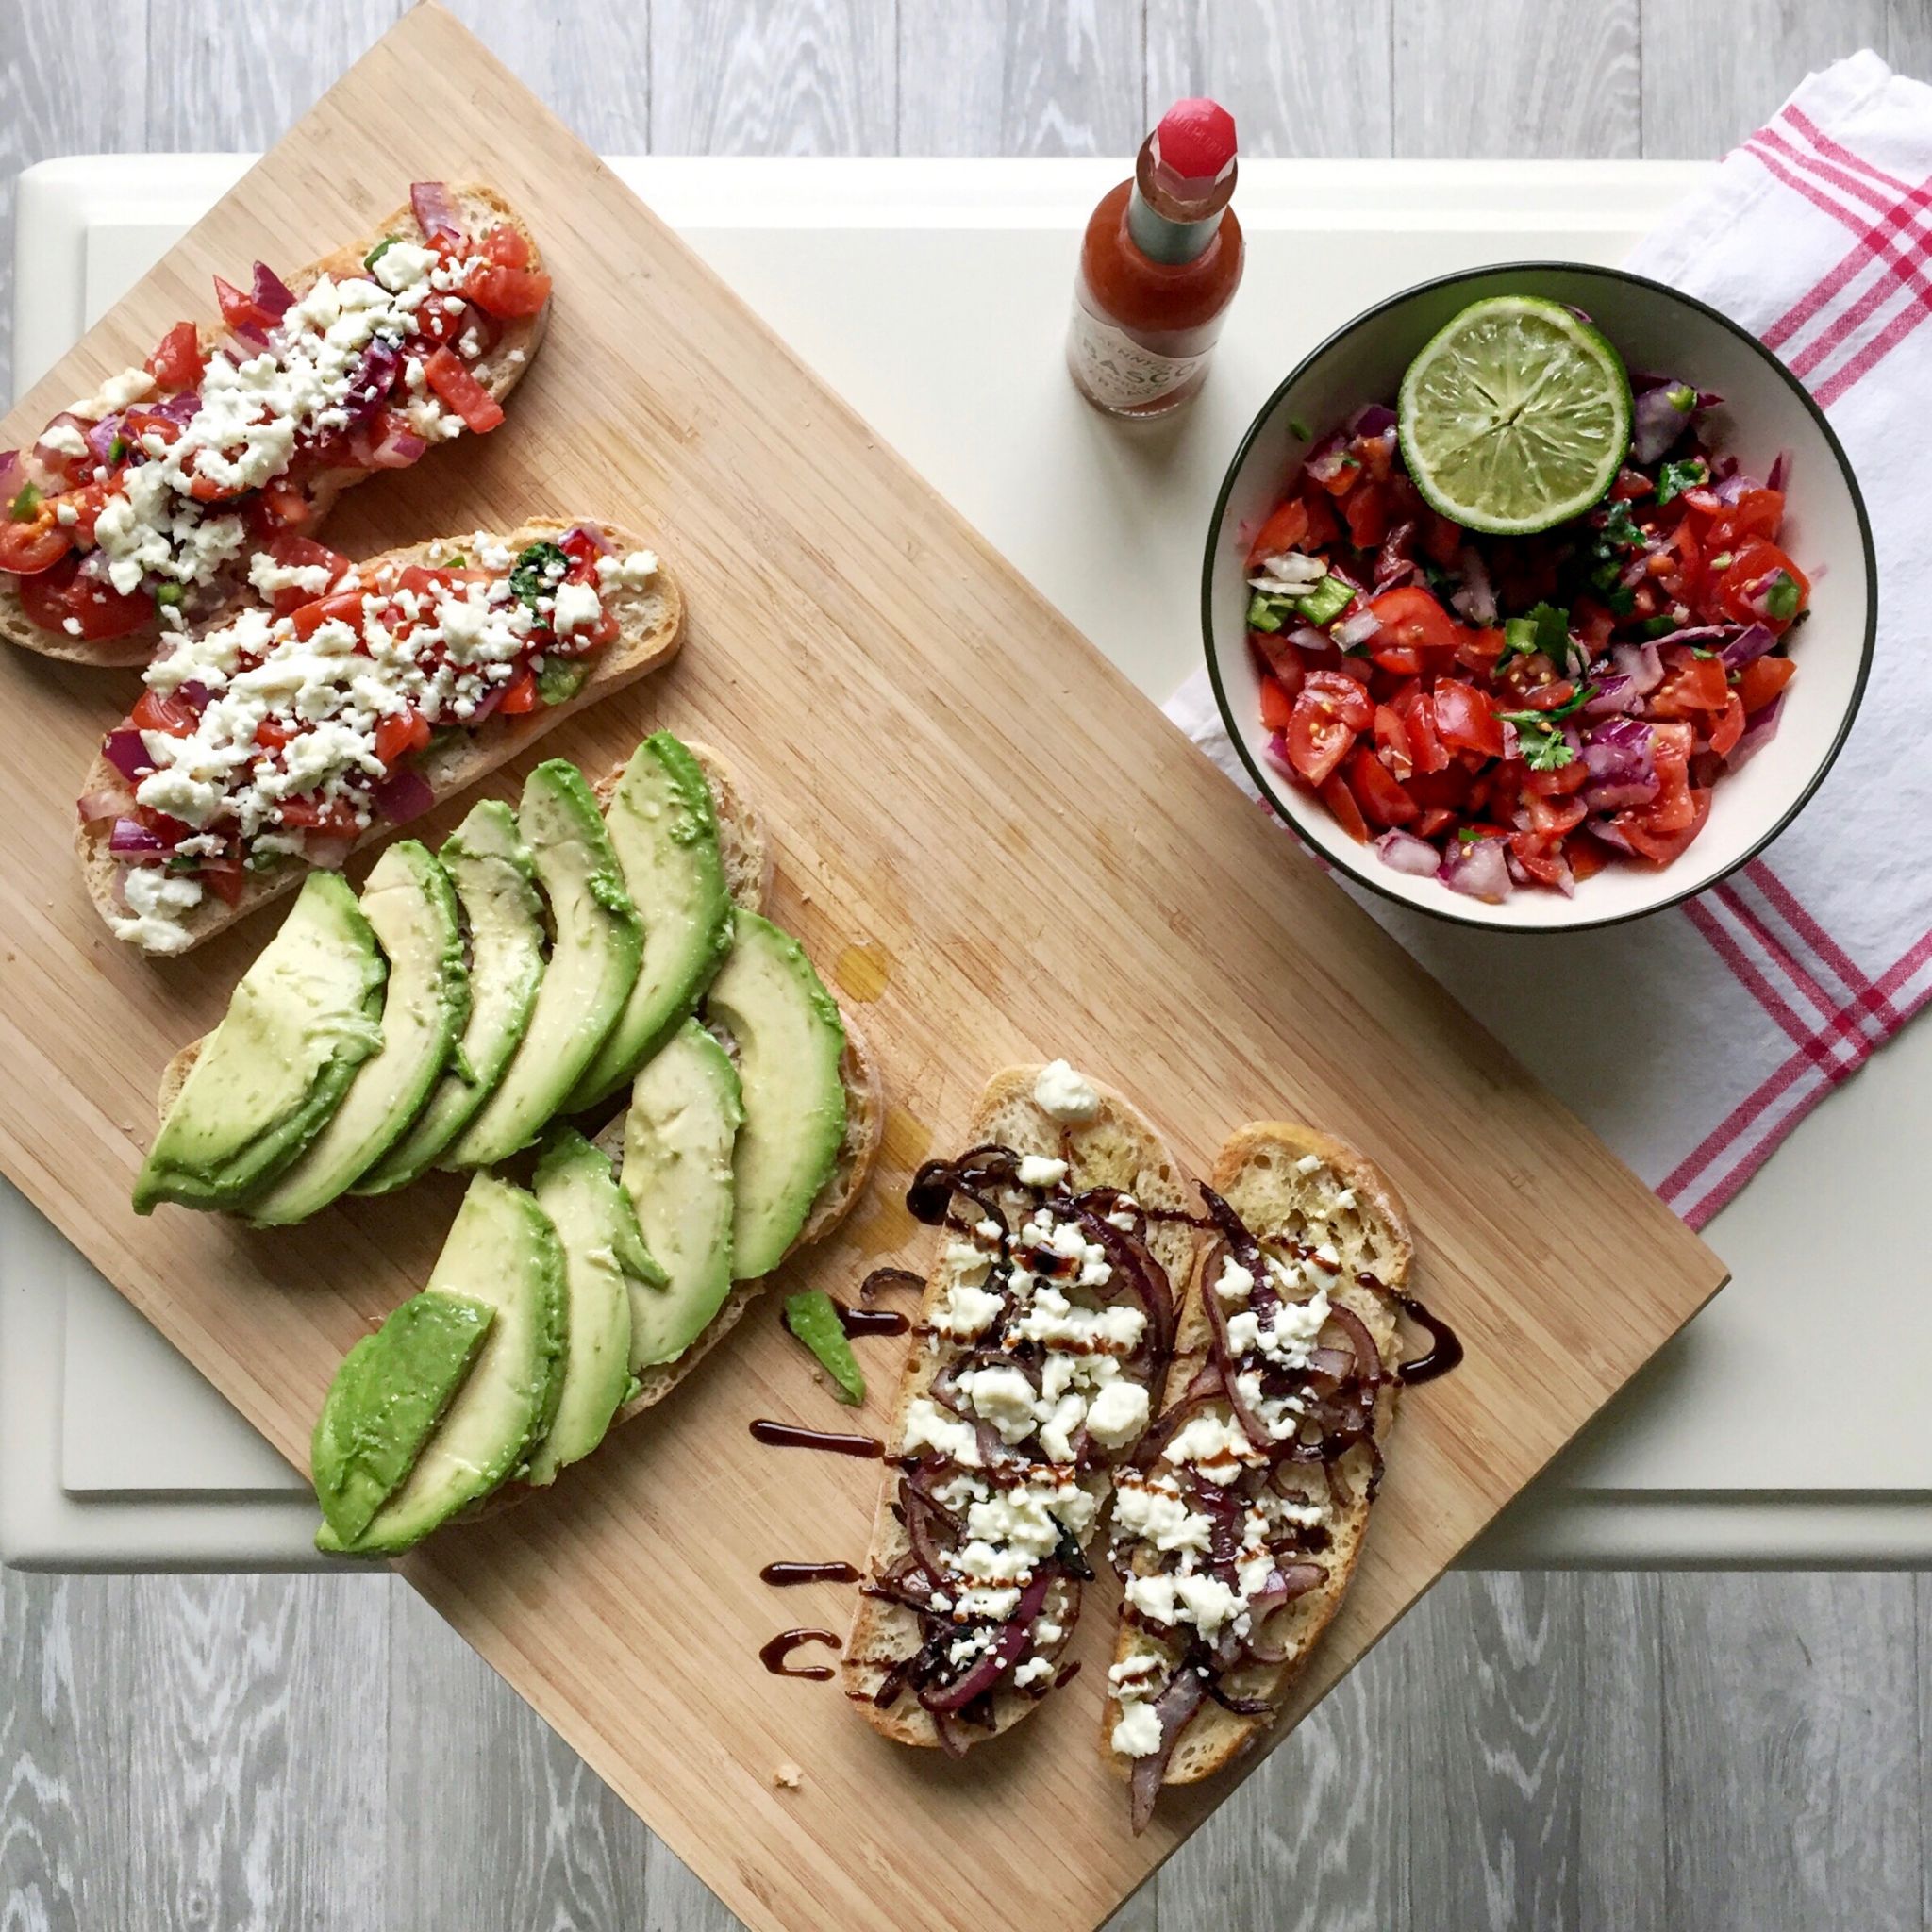 Did Someone Say Brunch? Triple Threat Brunch Toasts